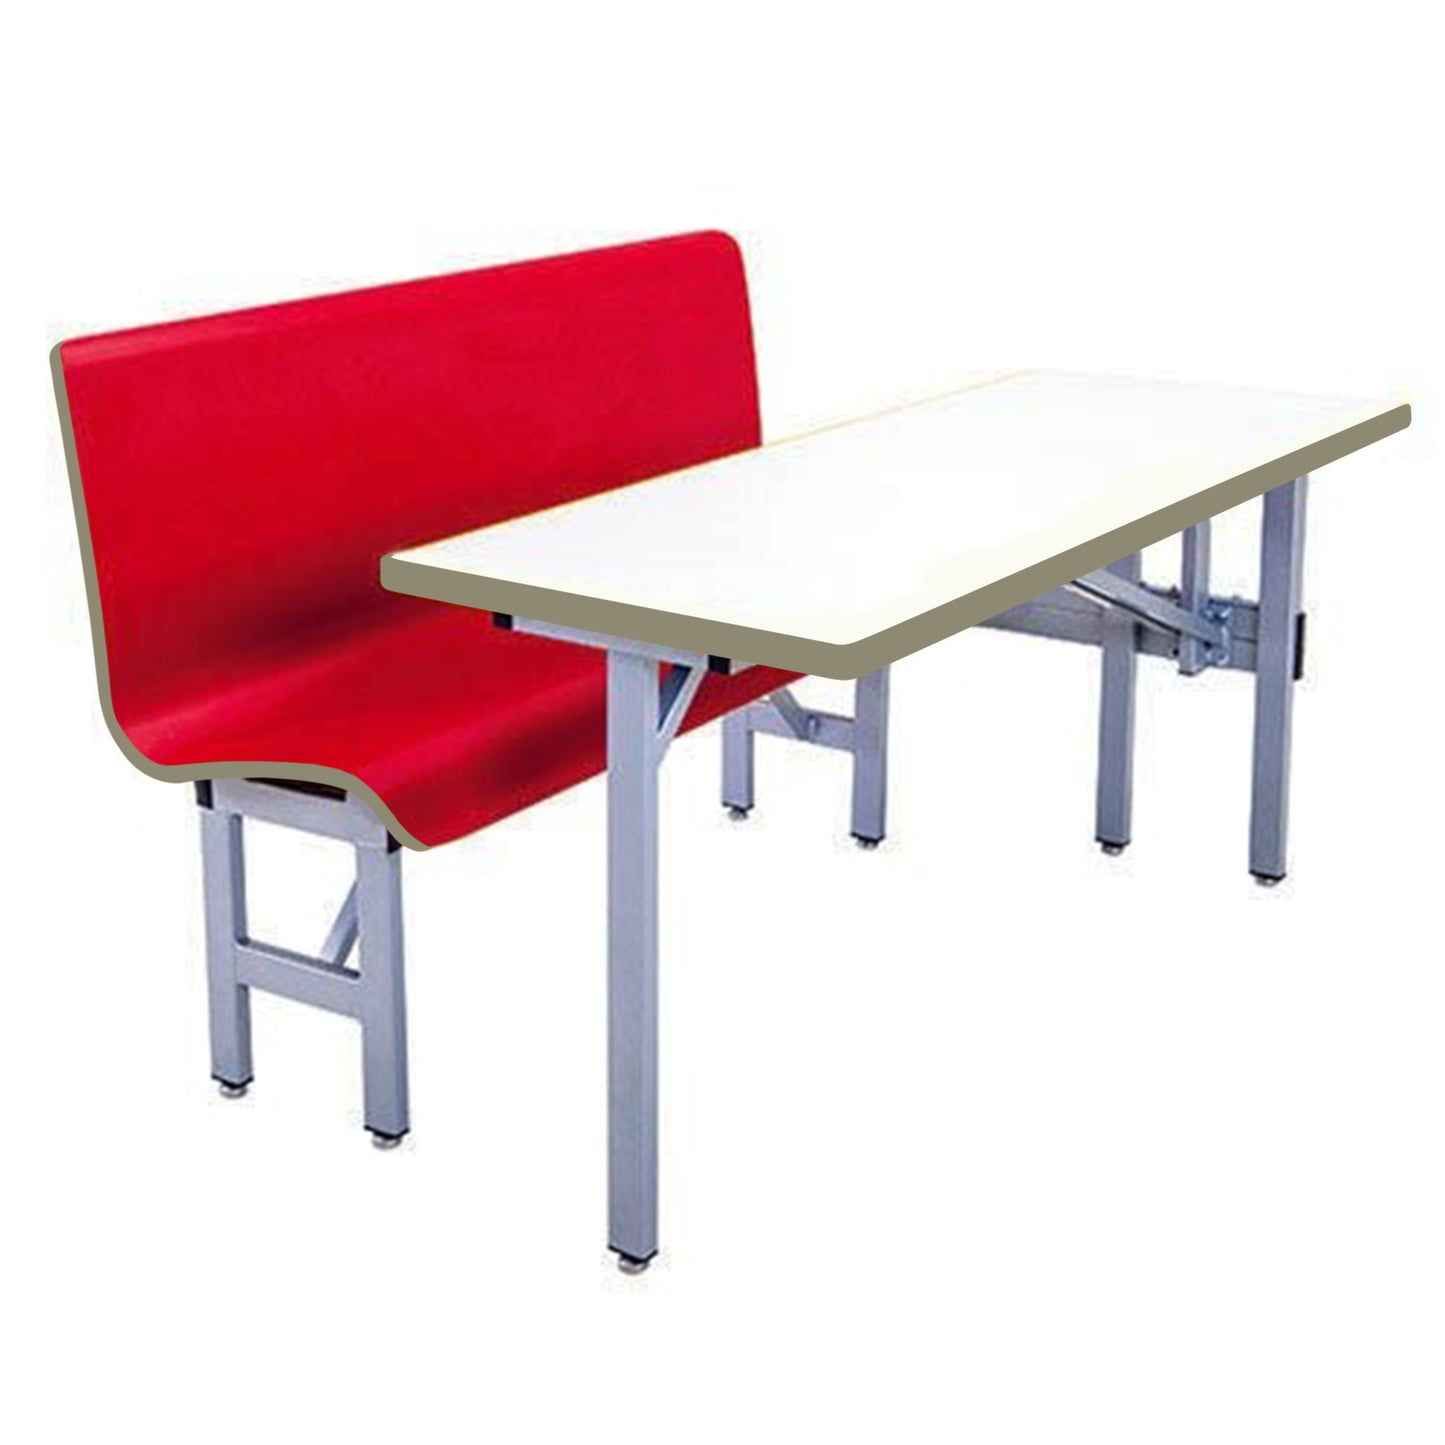 AmTab Booth Seating with Table - Half Package - 54"W x 60"L x 38"H  (AMT-MWHBSP305)